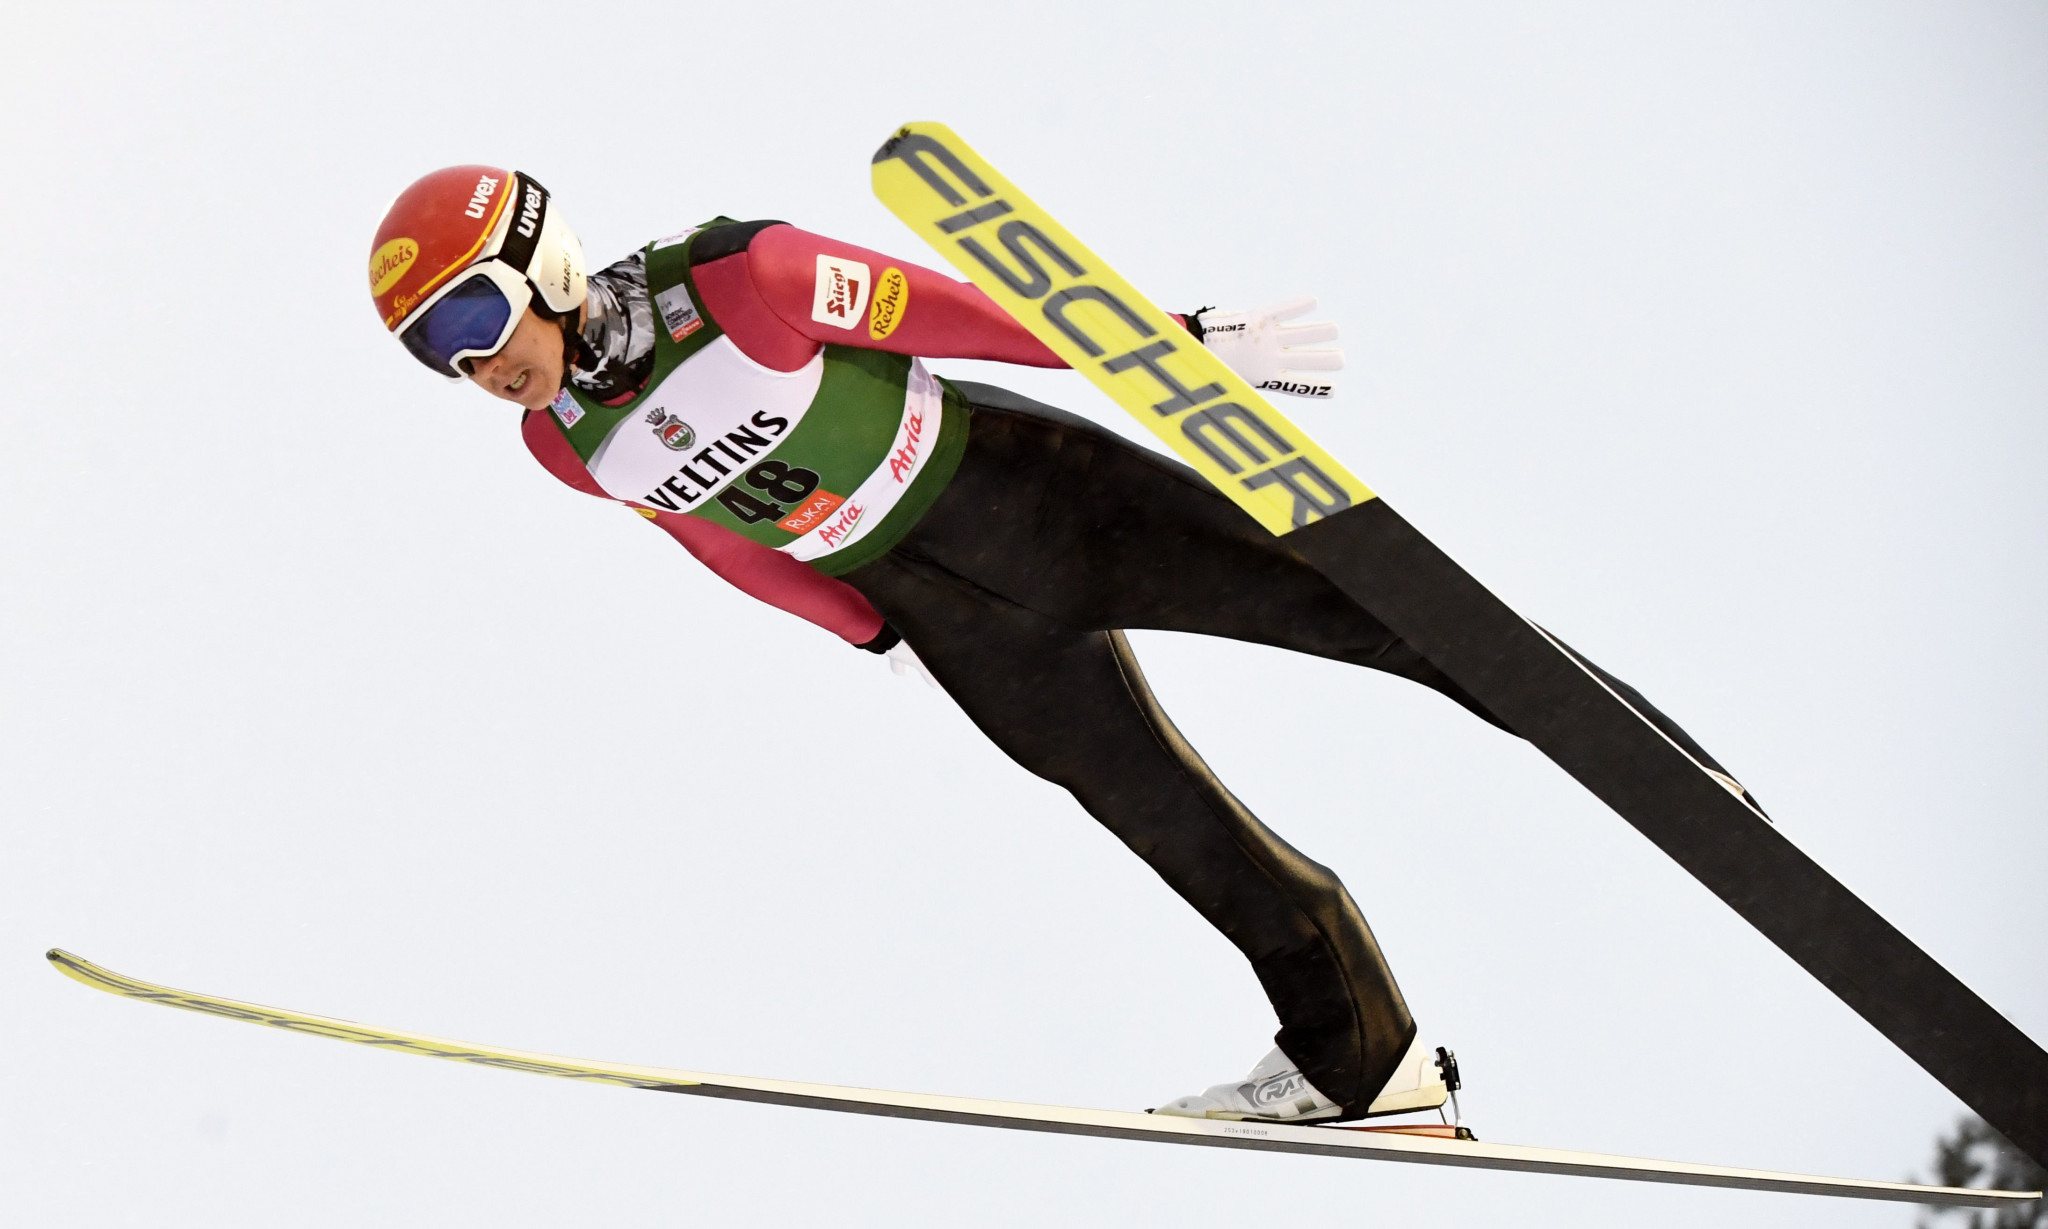 Seidl clinches shock FIS Nordic Combined World Cup Triple triumph